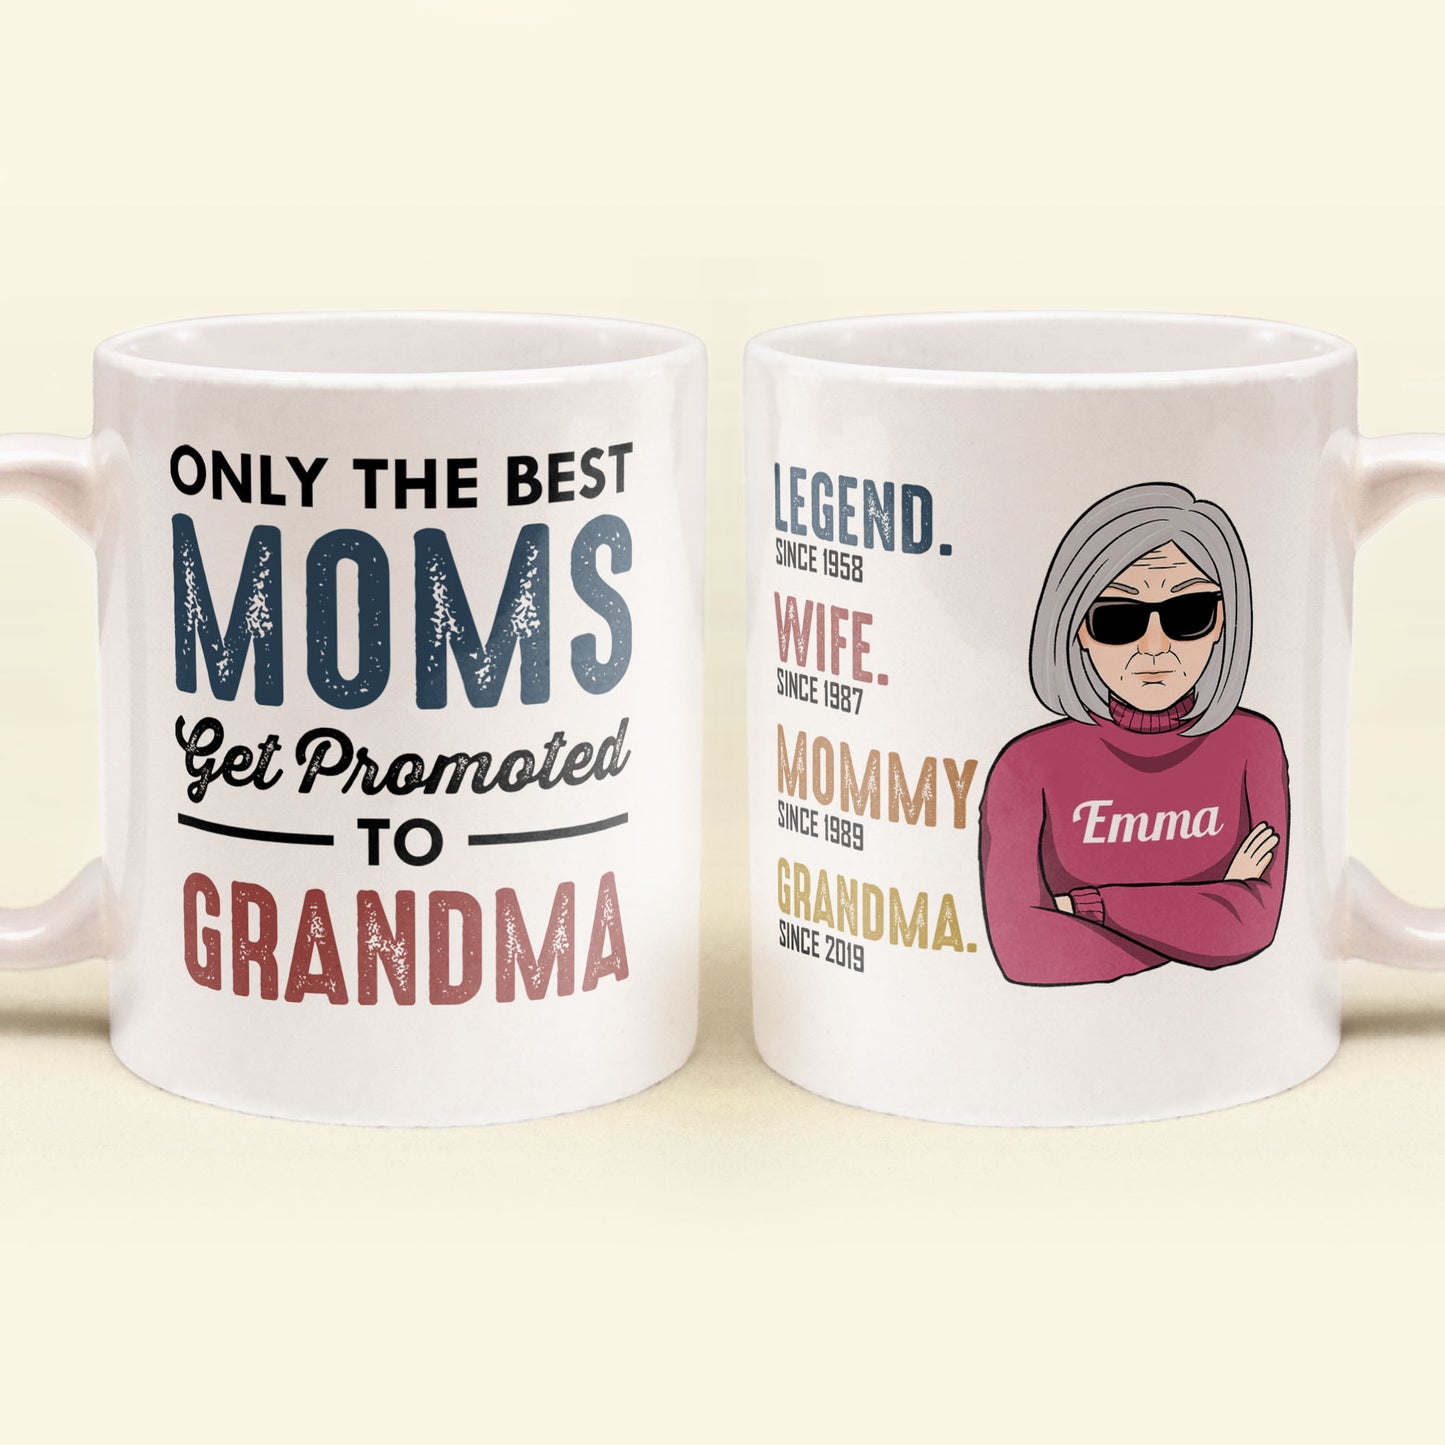 Only The Best Moms Get Promoted To Grandma - Personalized Mug - Birthday & Christmas Gift For Mom, Mother, Grandma, Nana, Mama